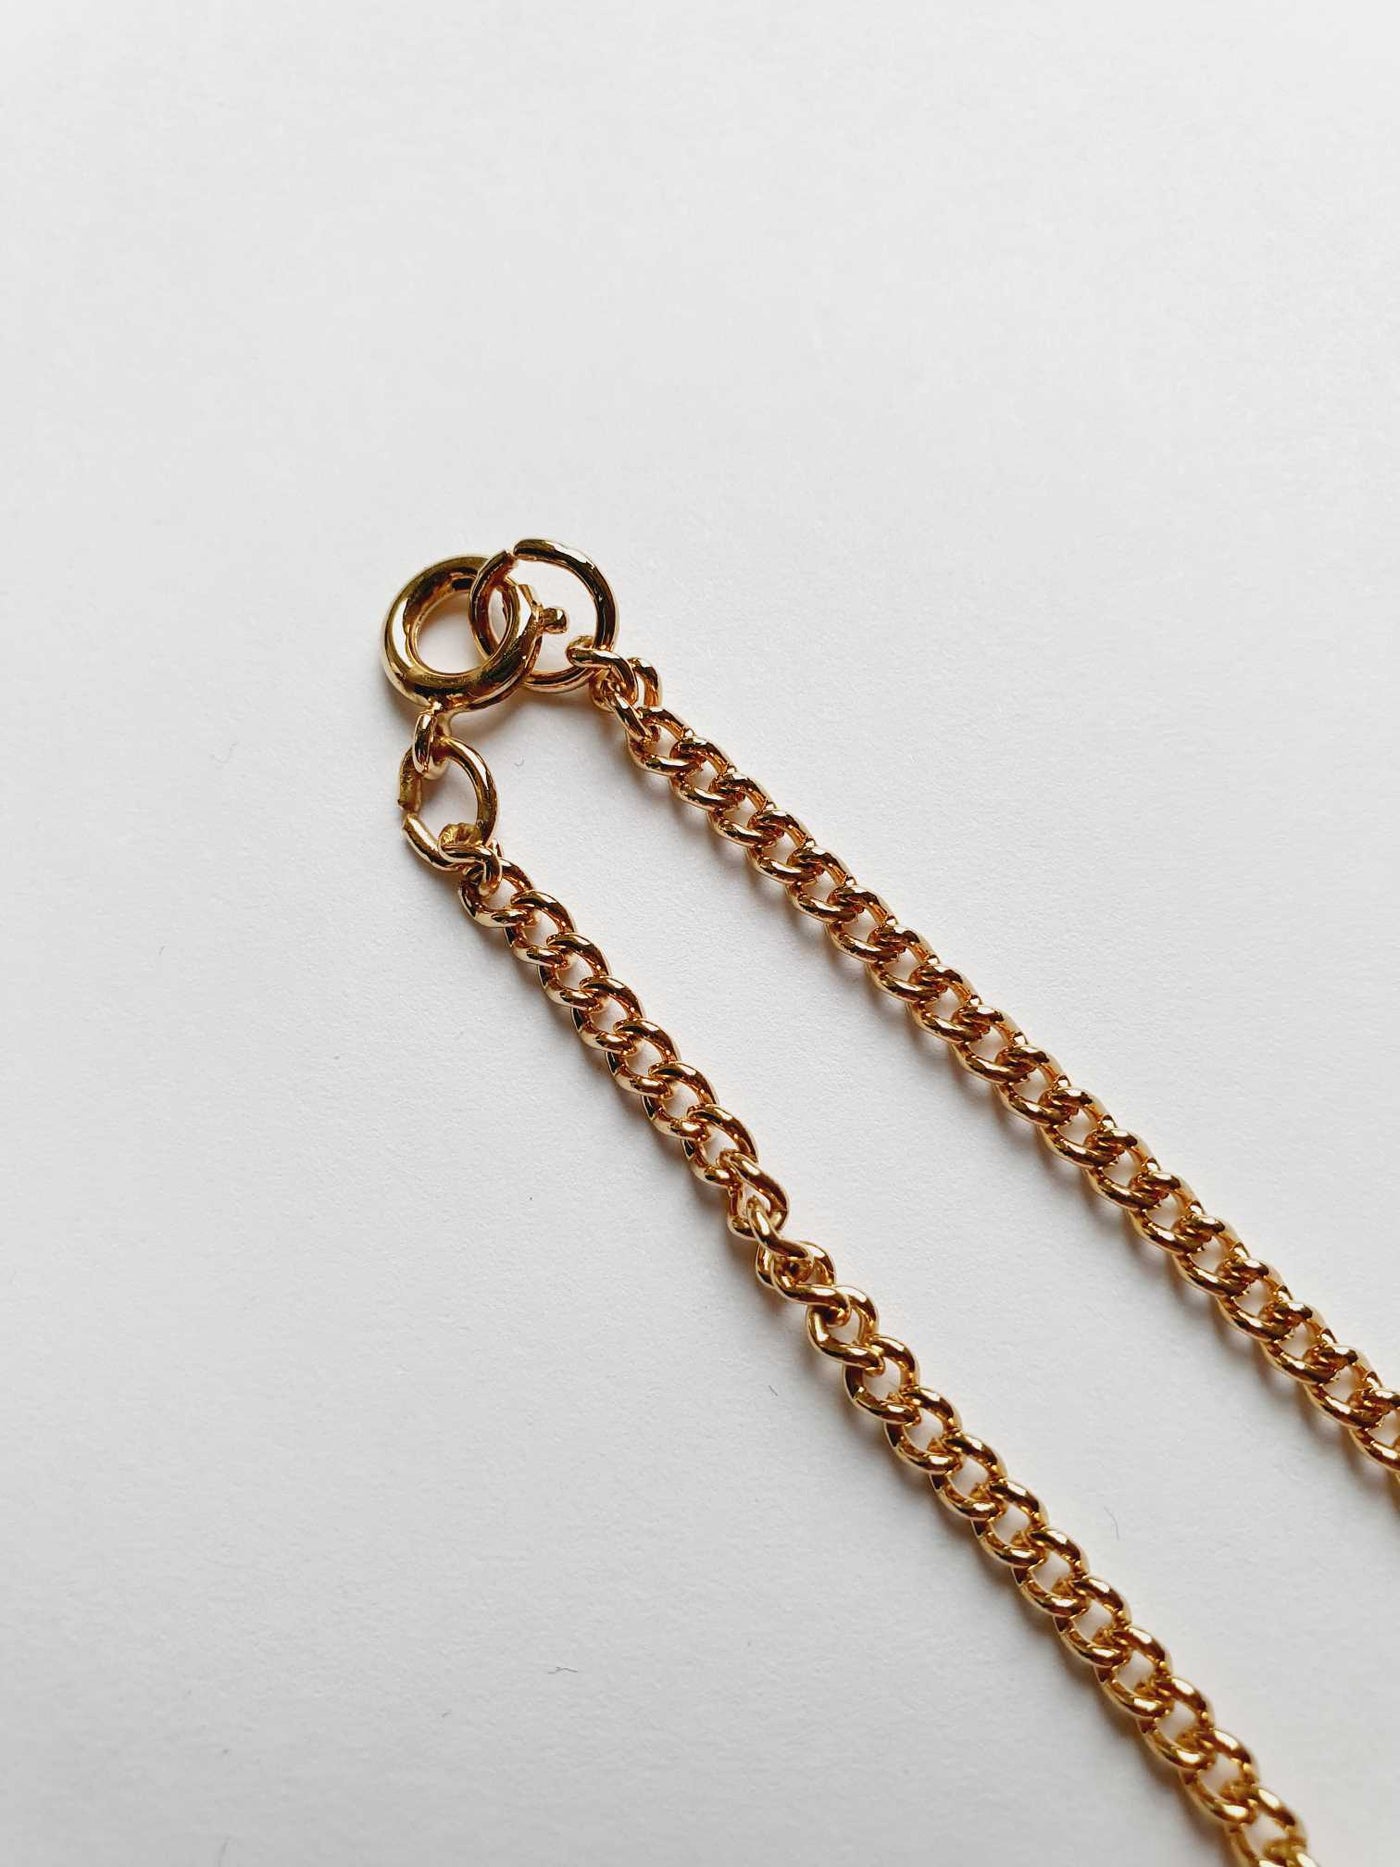 Vintage Gold Plated Chain Necklace with Crystals